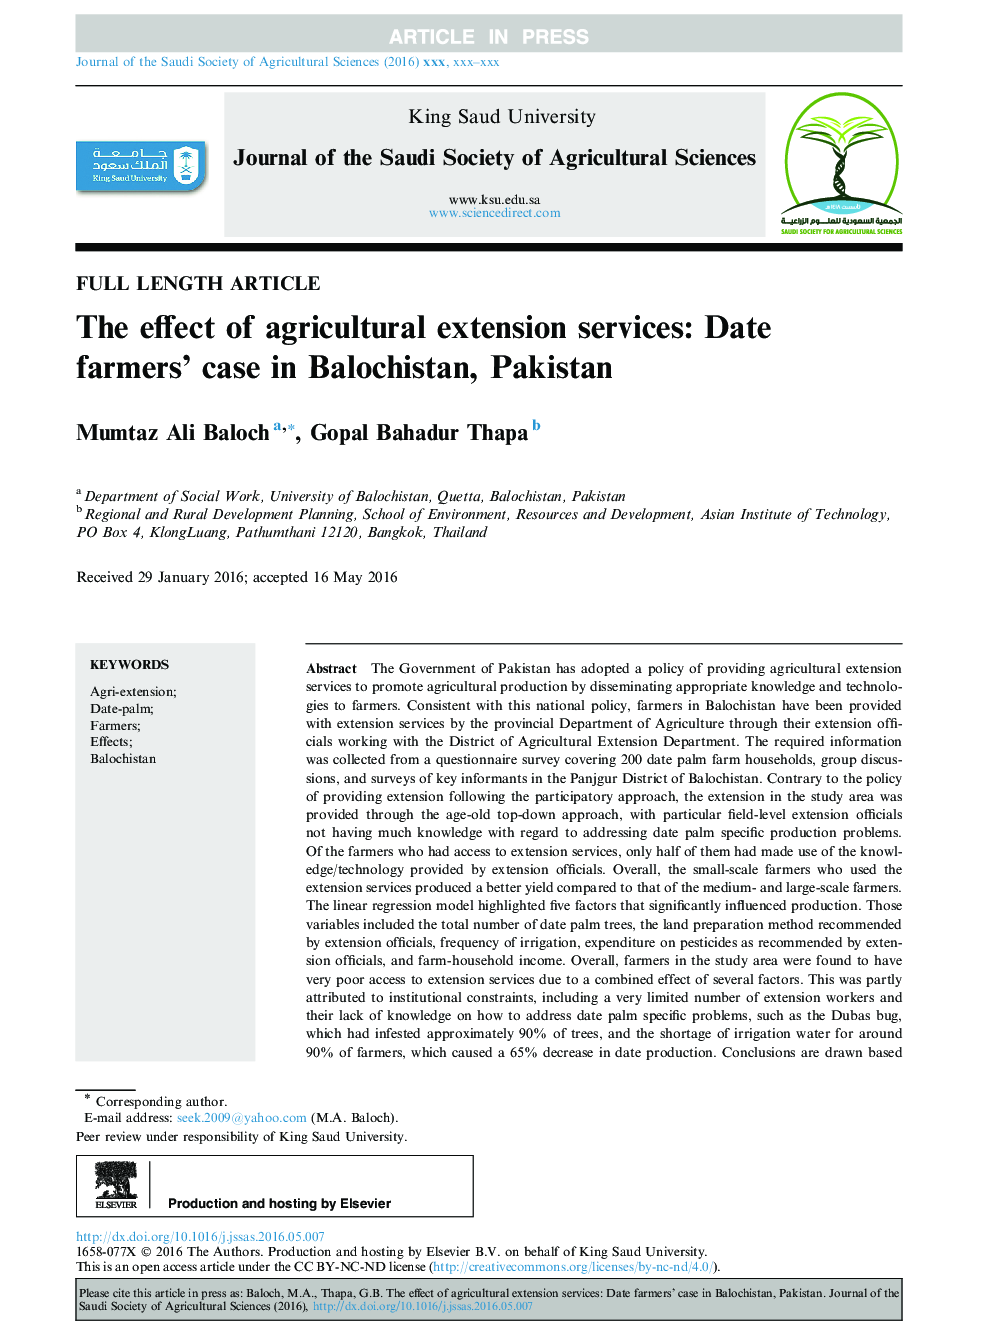 The effect of agricultural extension services: Date farmers' case in Balochistan, Pakistan